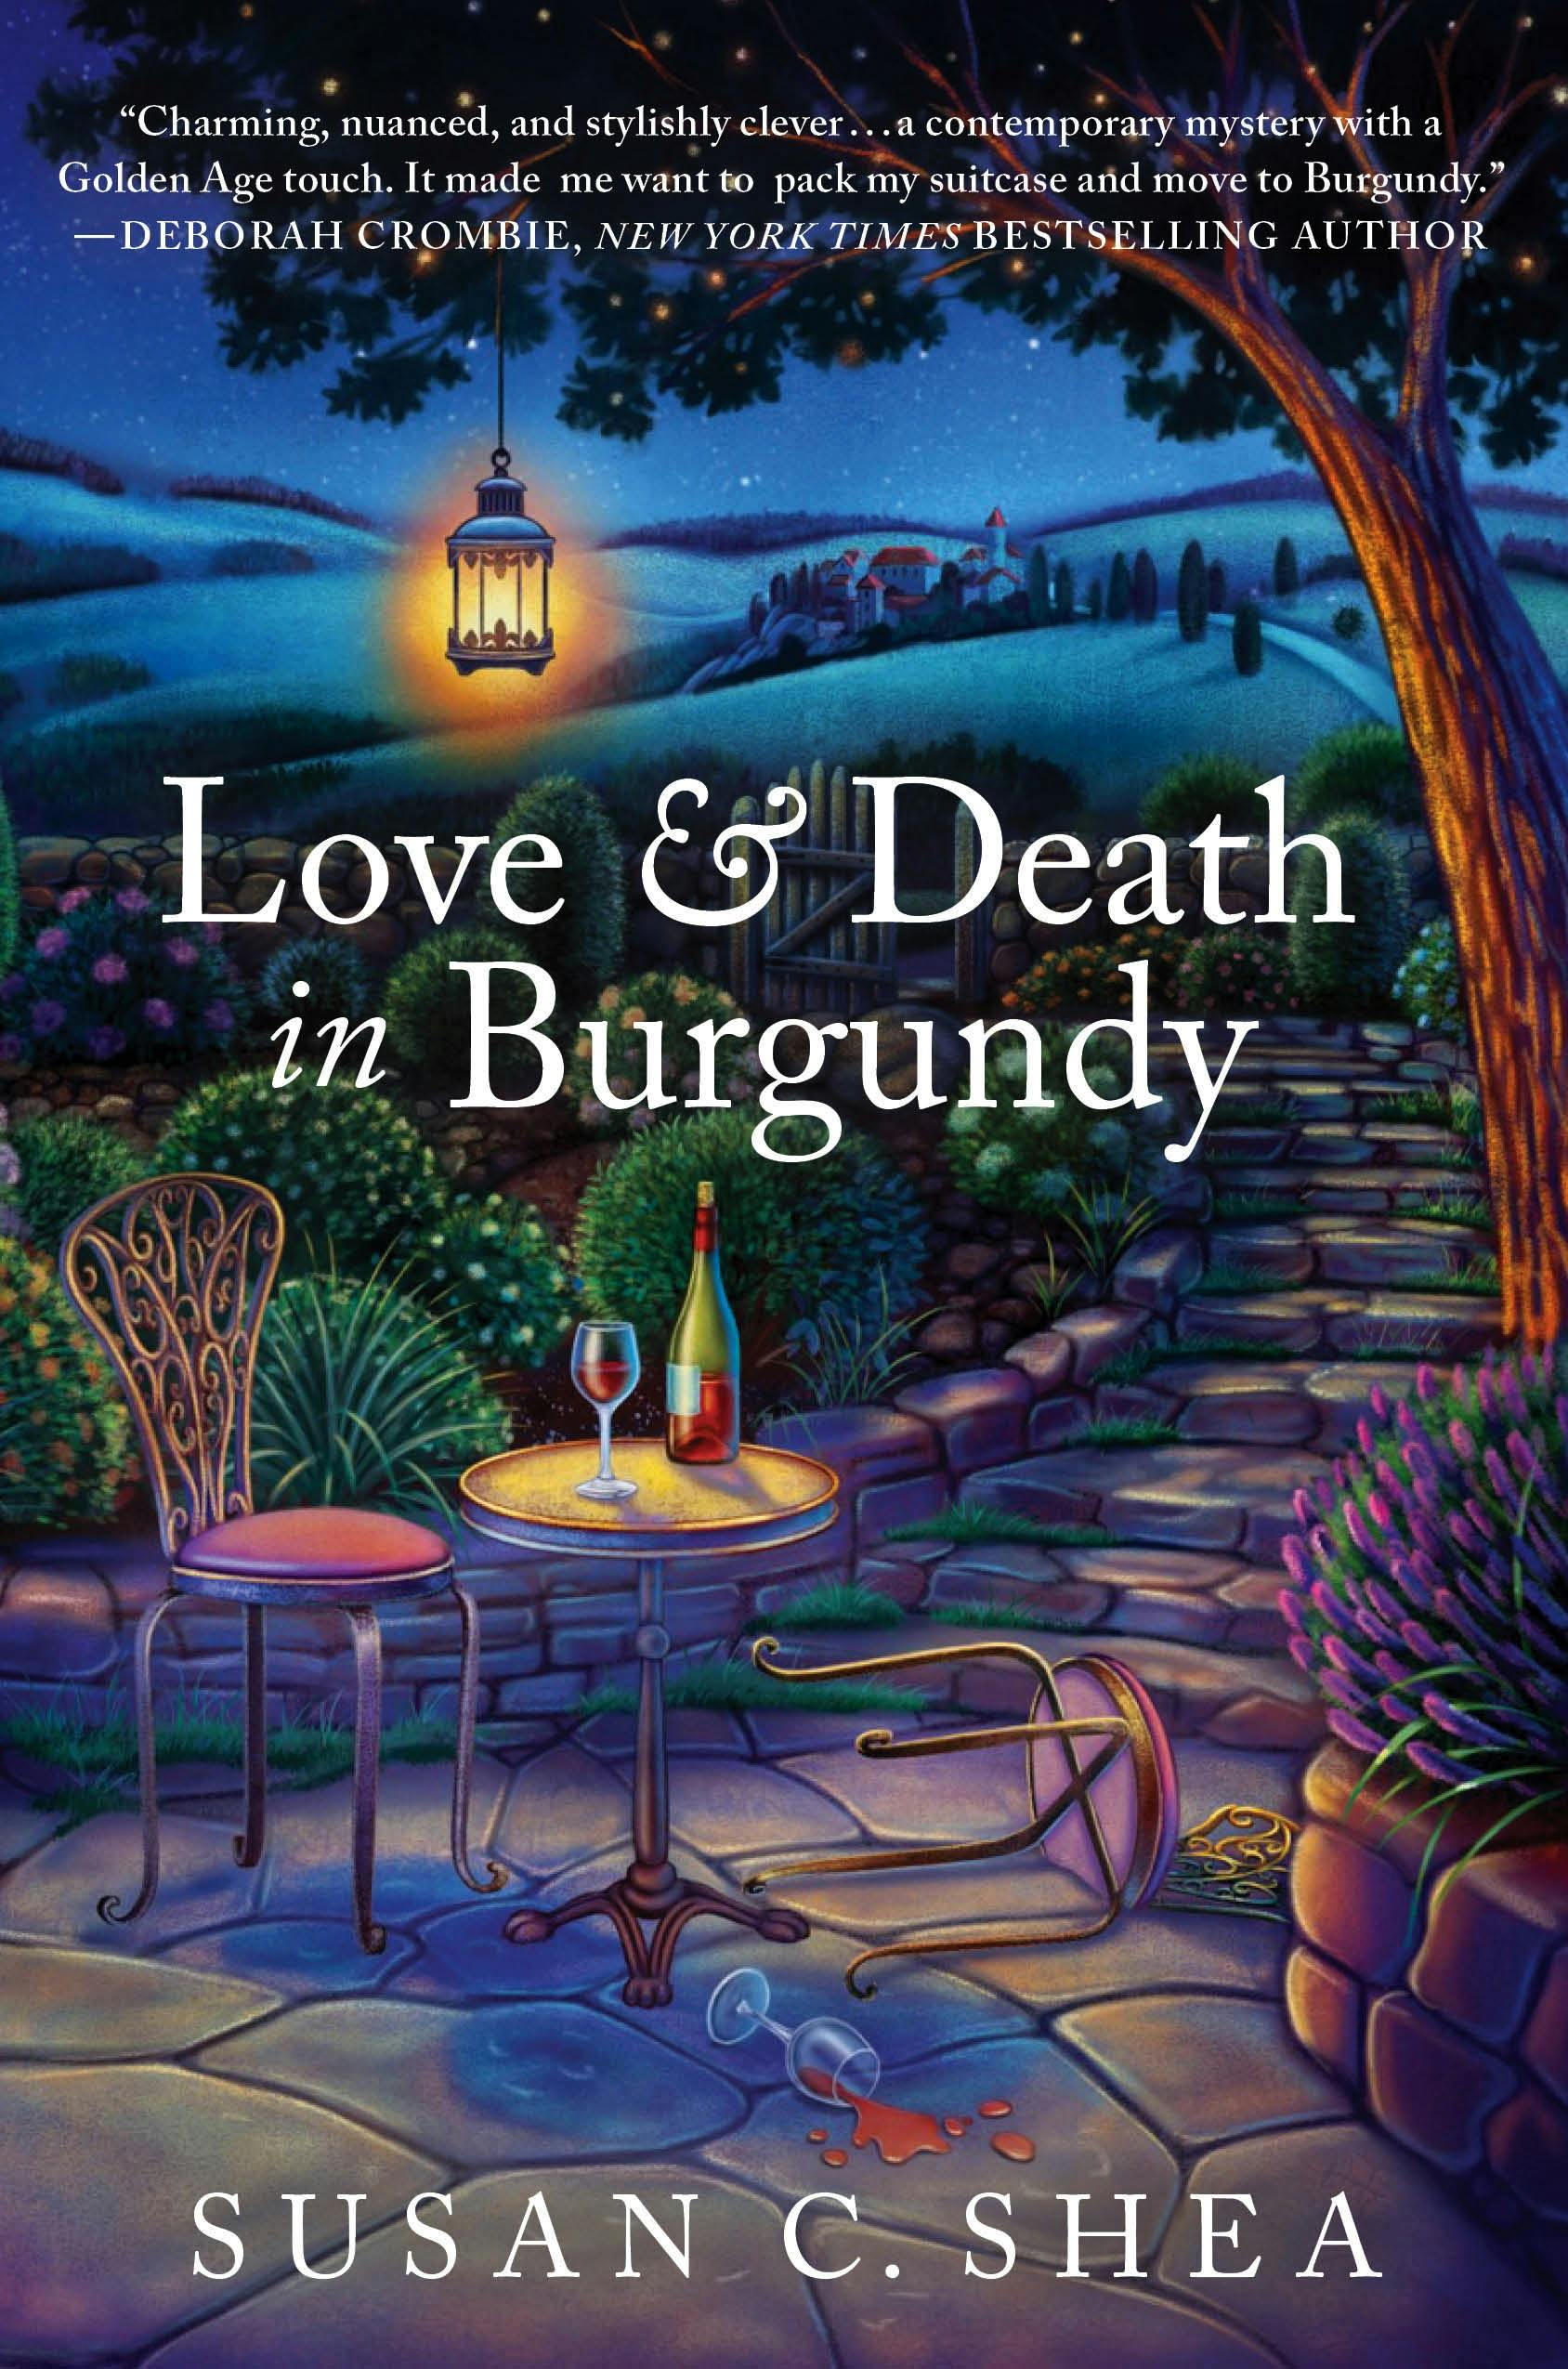 Image of Love & Death in Burgundy